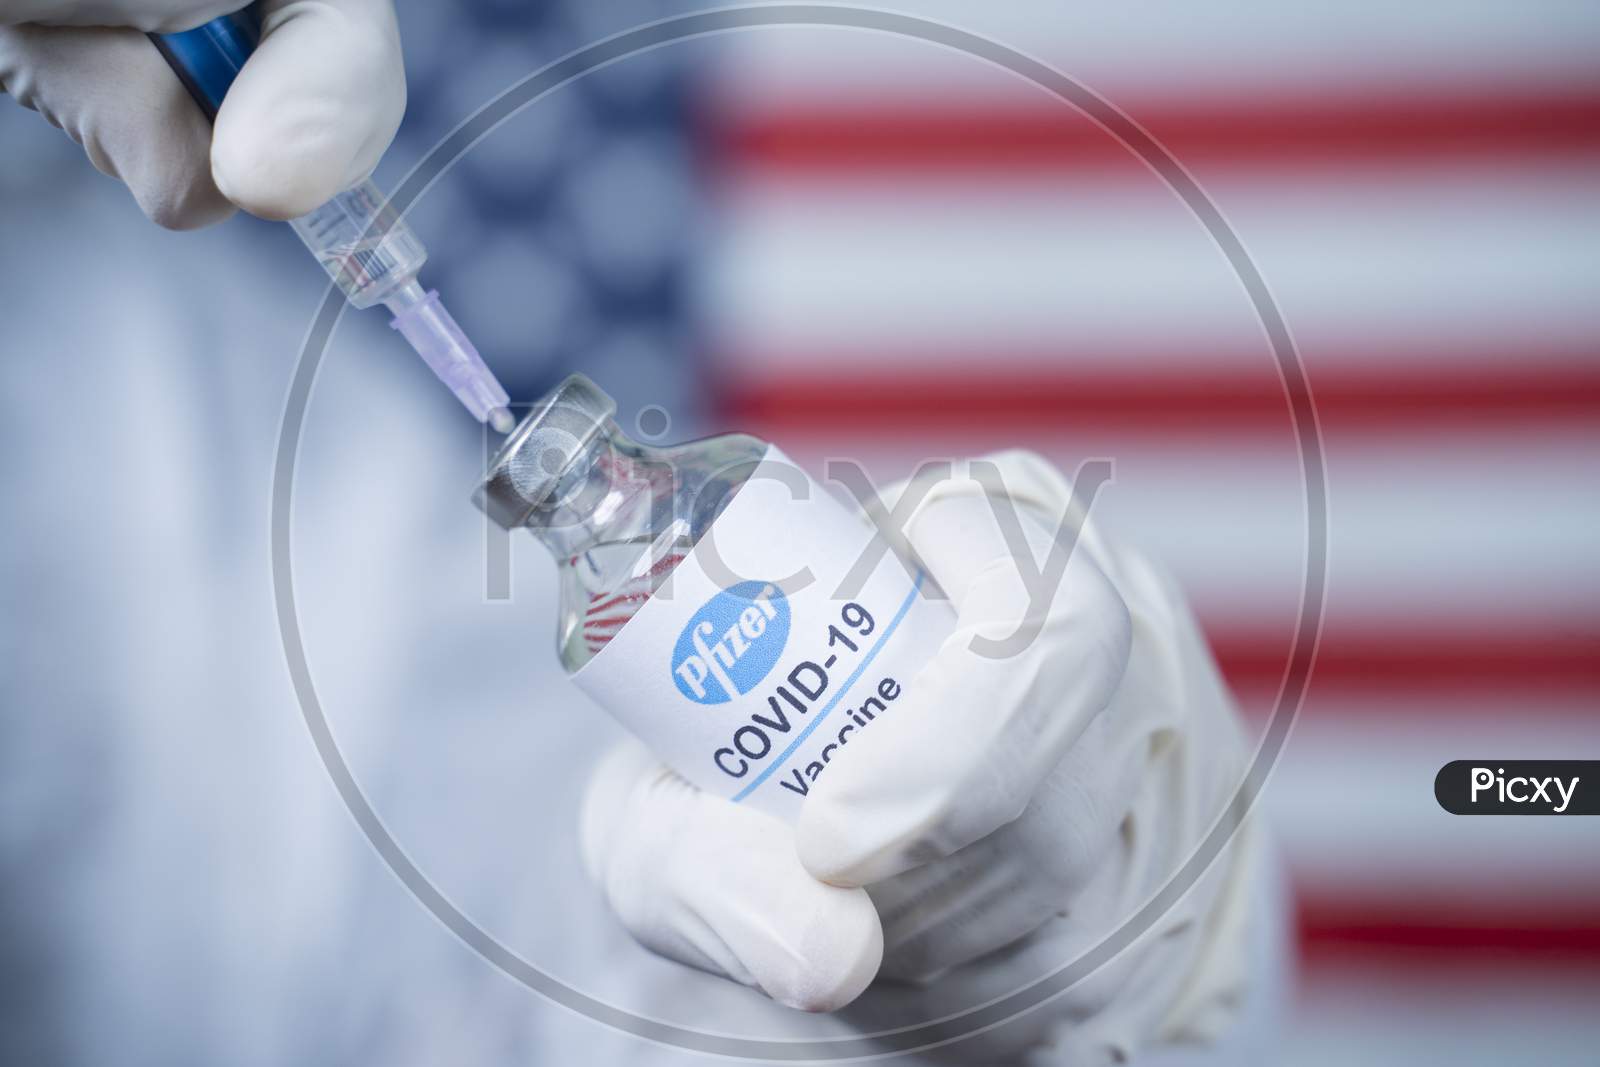 Maski, India - Nov 12,2020 : Doctor Holding Pfizer Biontech Vaccine And Syringe To Protect Against Coronavirus Covid-19 Disease With Us Flag As Background.